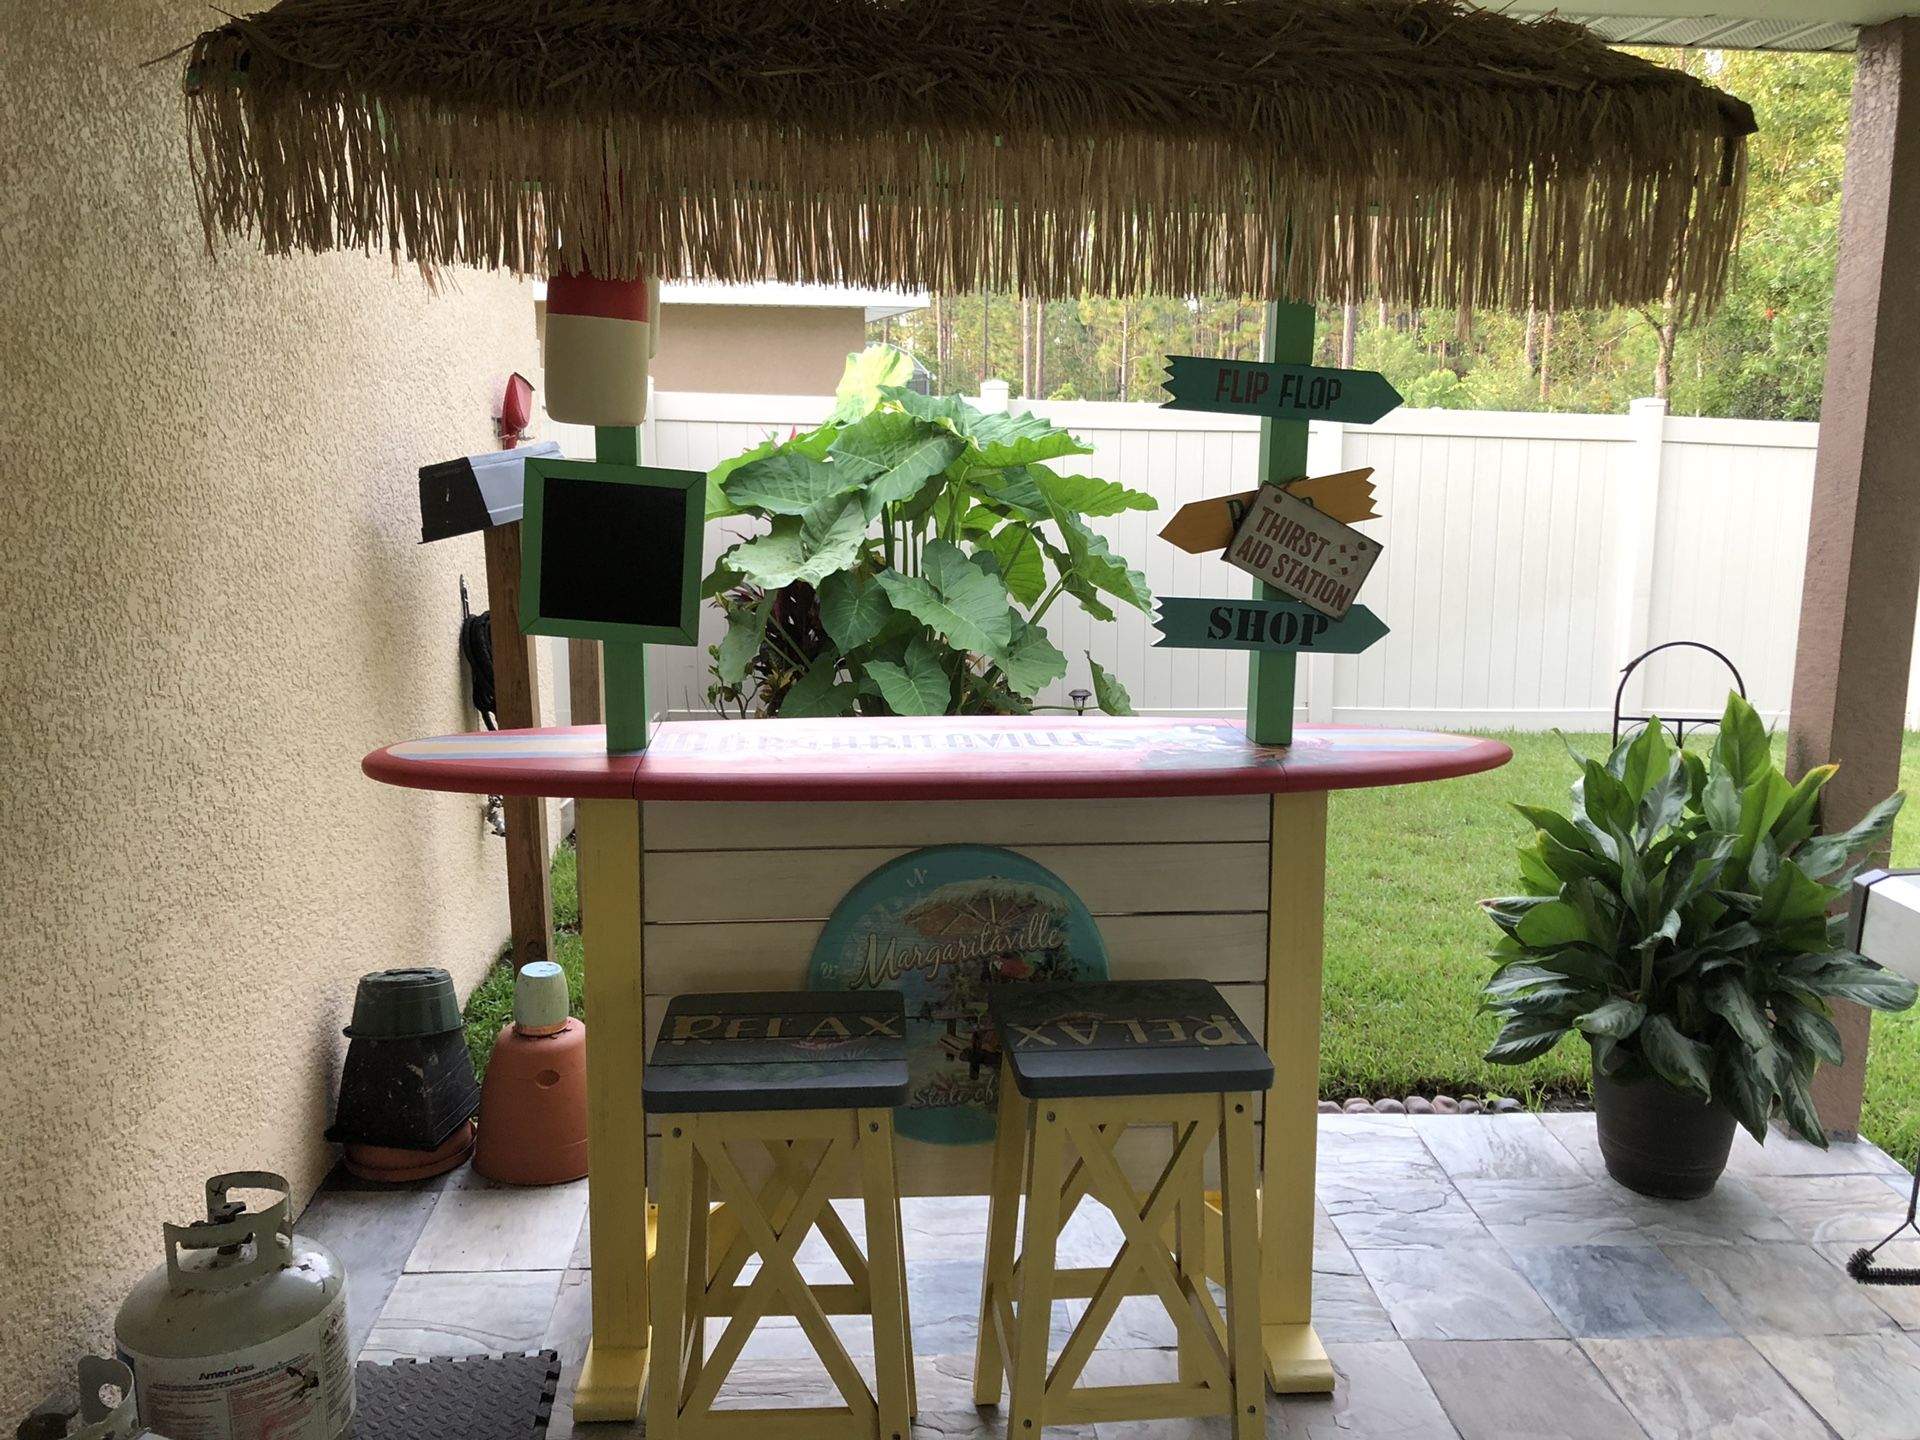 Margaritaville Bar with stools